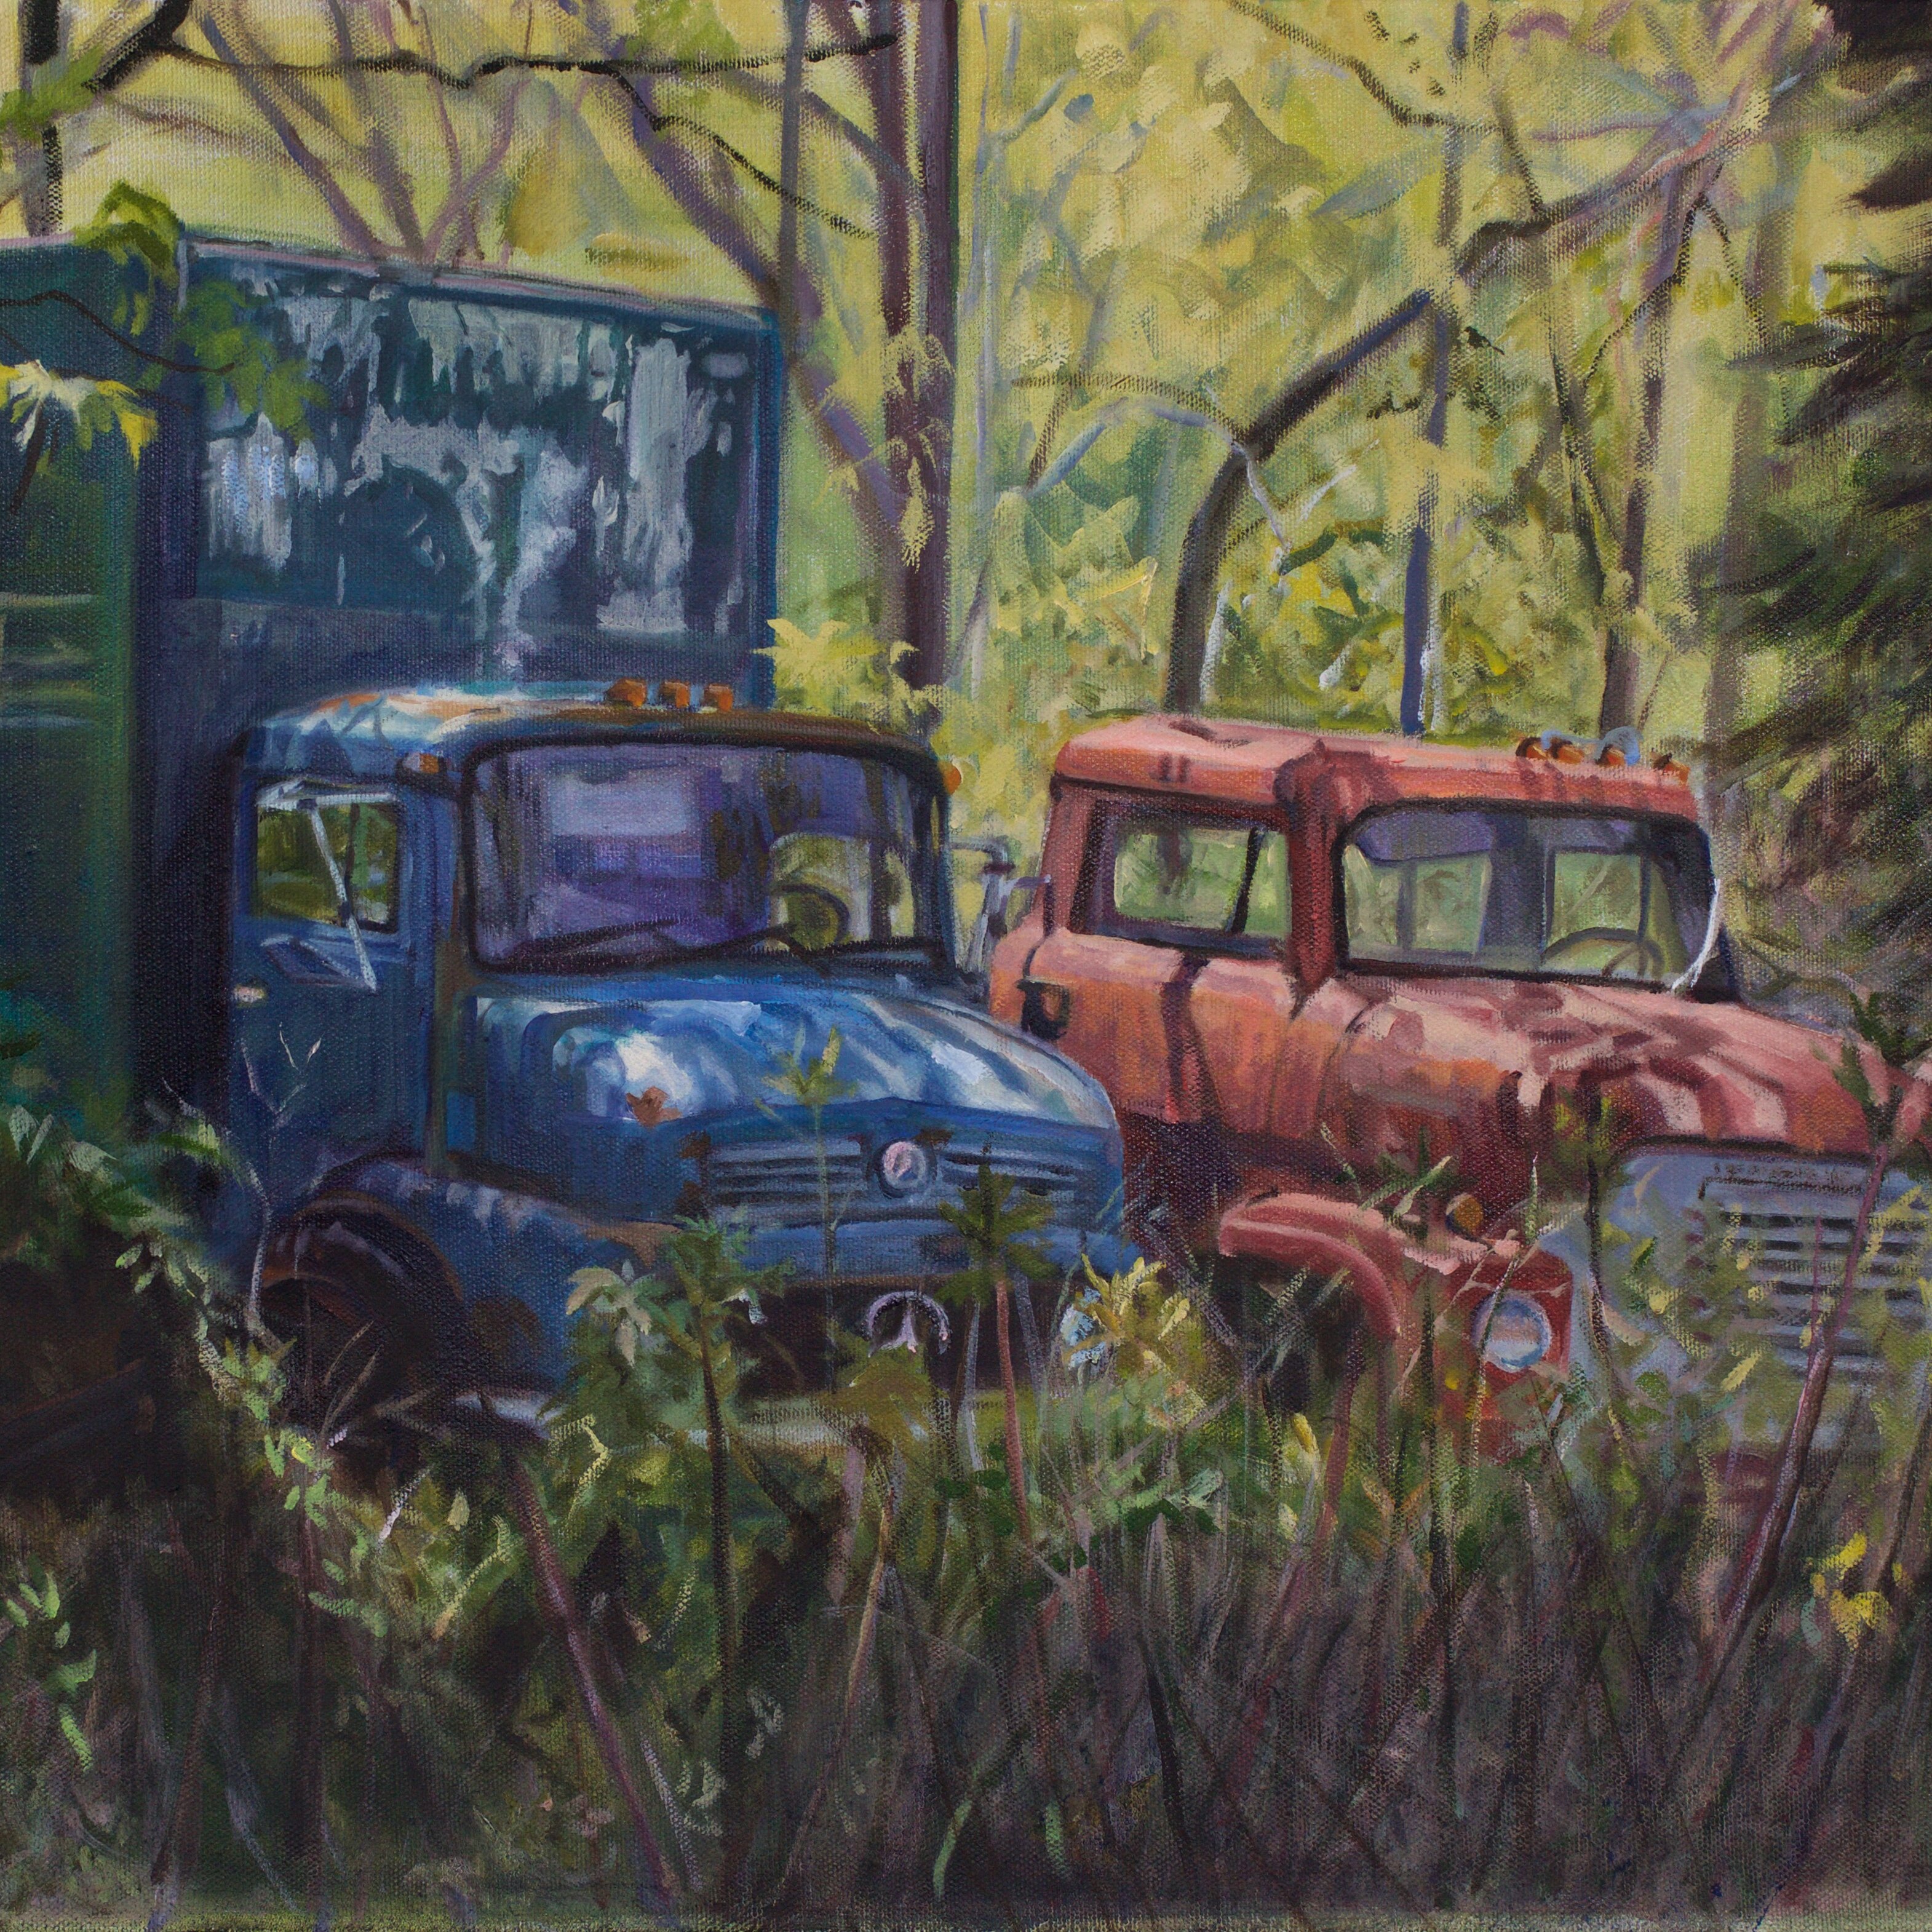 Oil painting of a truck and a car